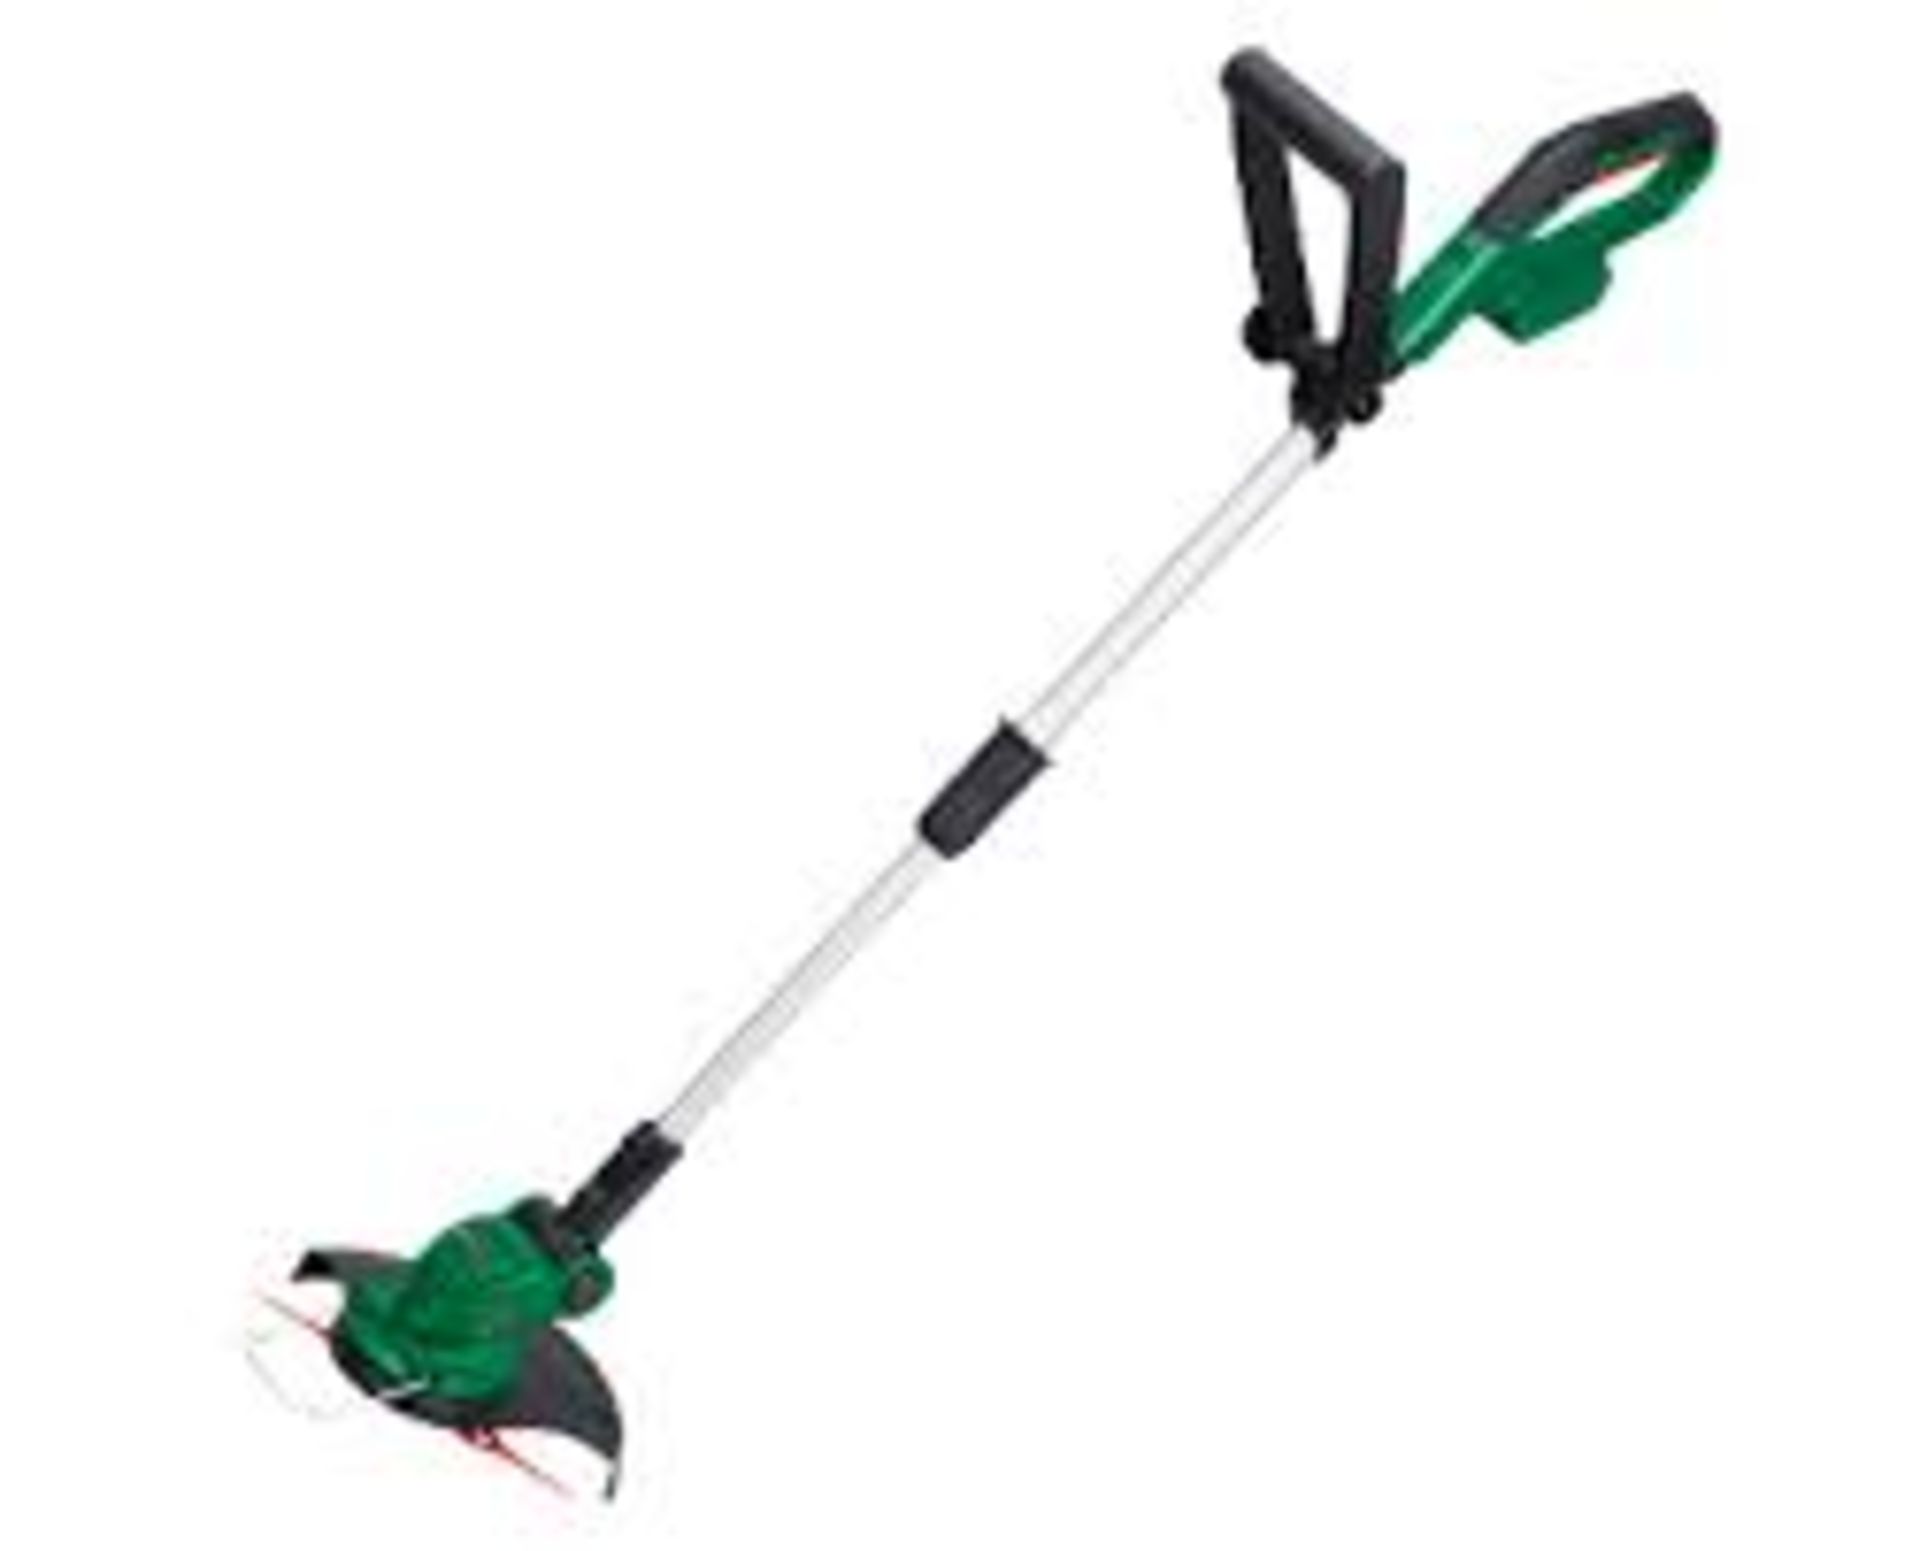 Boxed Ferrex 20V Li-ion Cordless Grass Trimmer RRP £45 (Public Viewing and Appraisals Available)